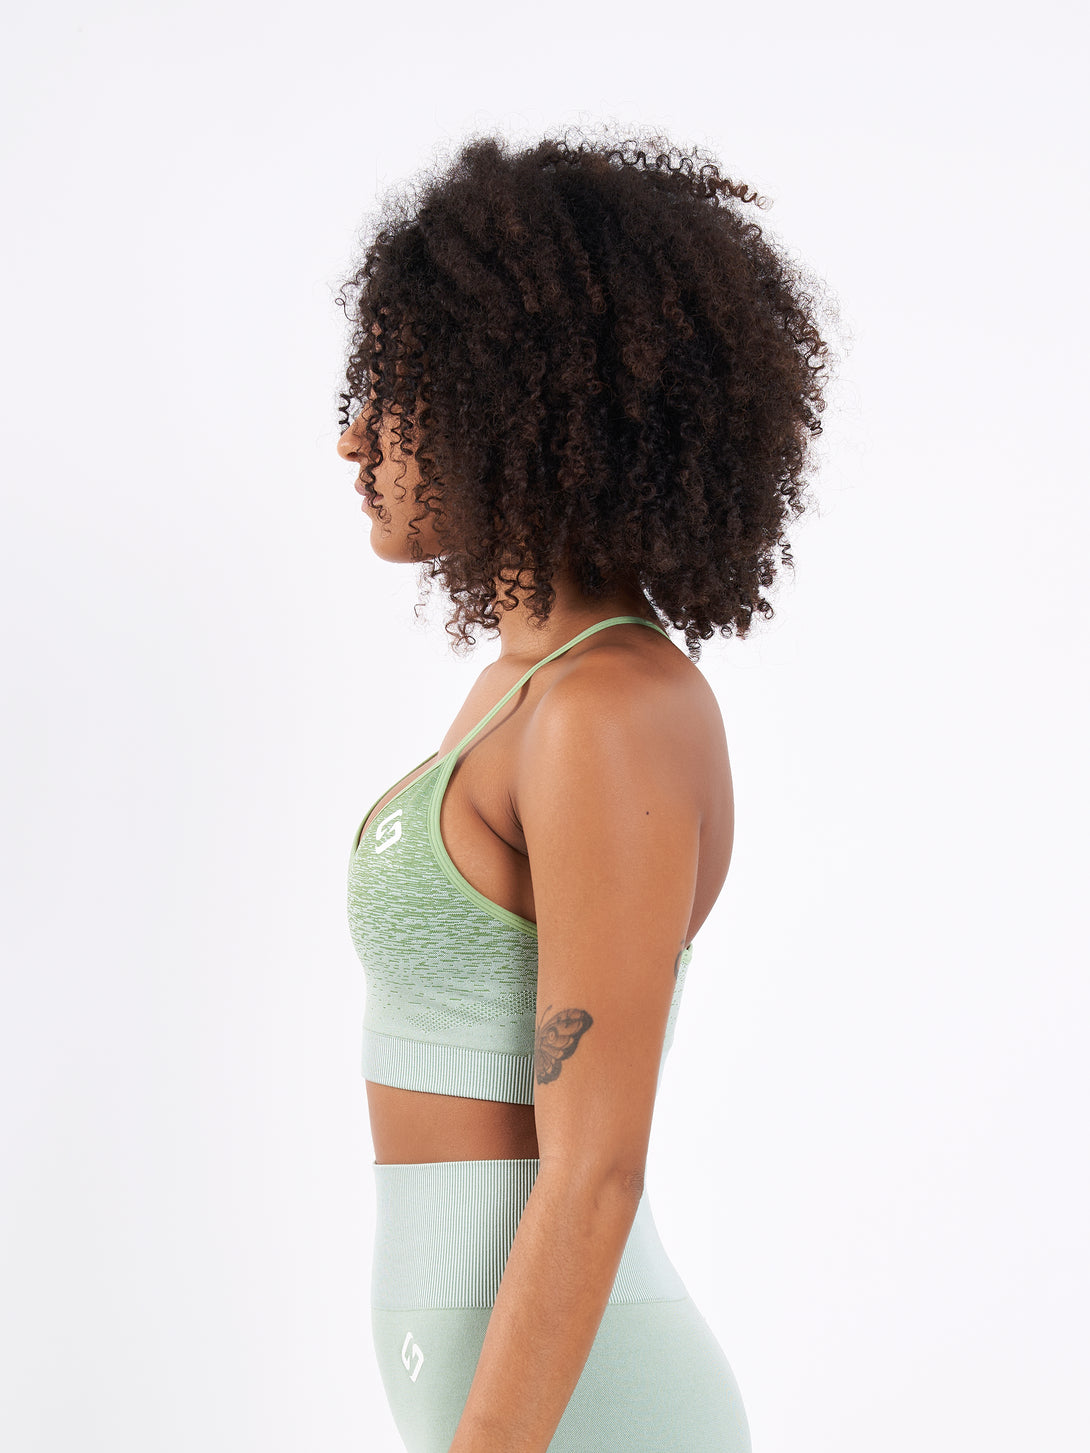 A Woman Wearing Mist Green Color Seamless Low-Impact Sports Bra with Ombre Effect. Chic Comfort